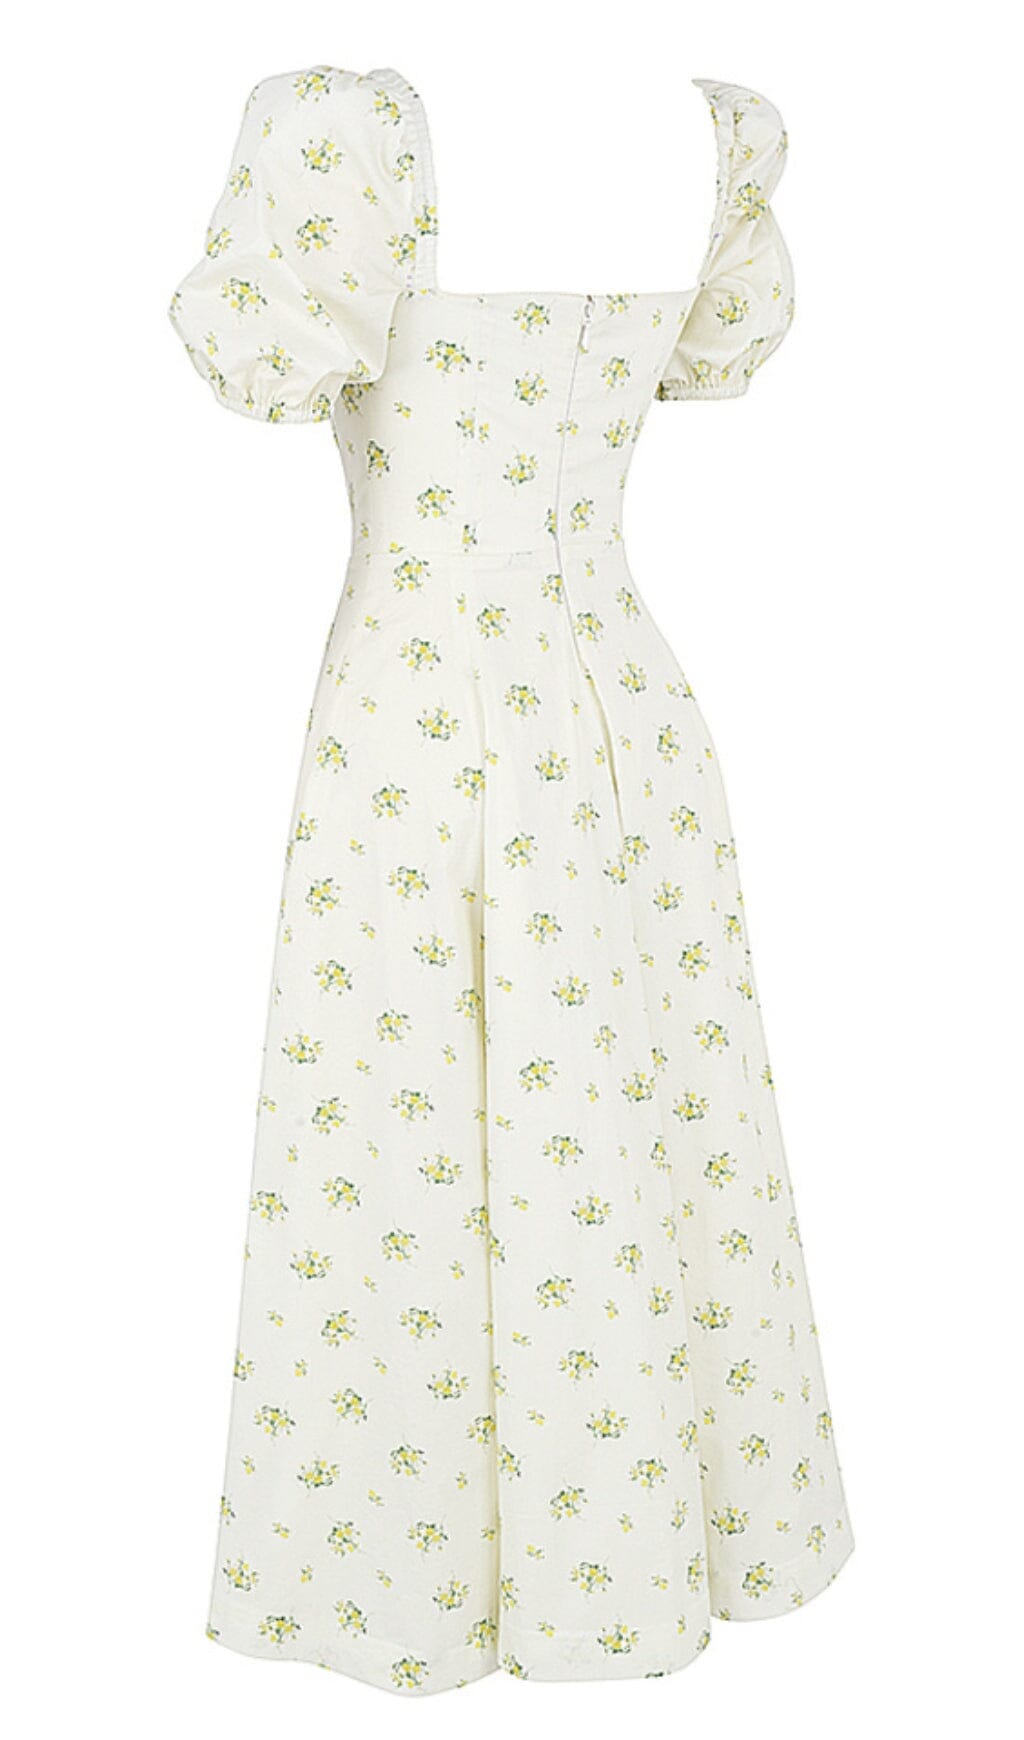 VINTAGE FLORAL PUFF SLEEVE MIDI DRESS IN WHITE